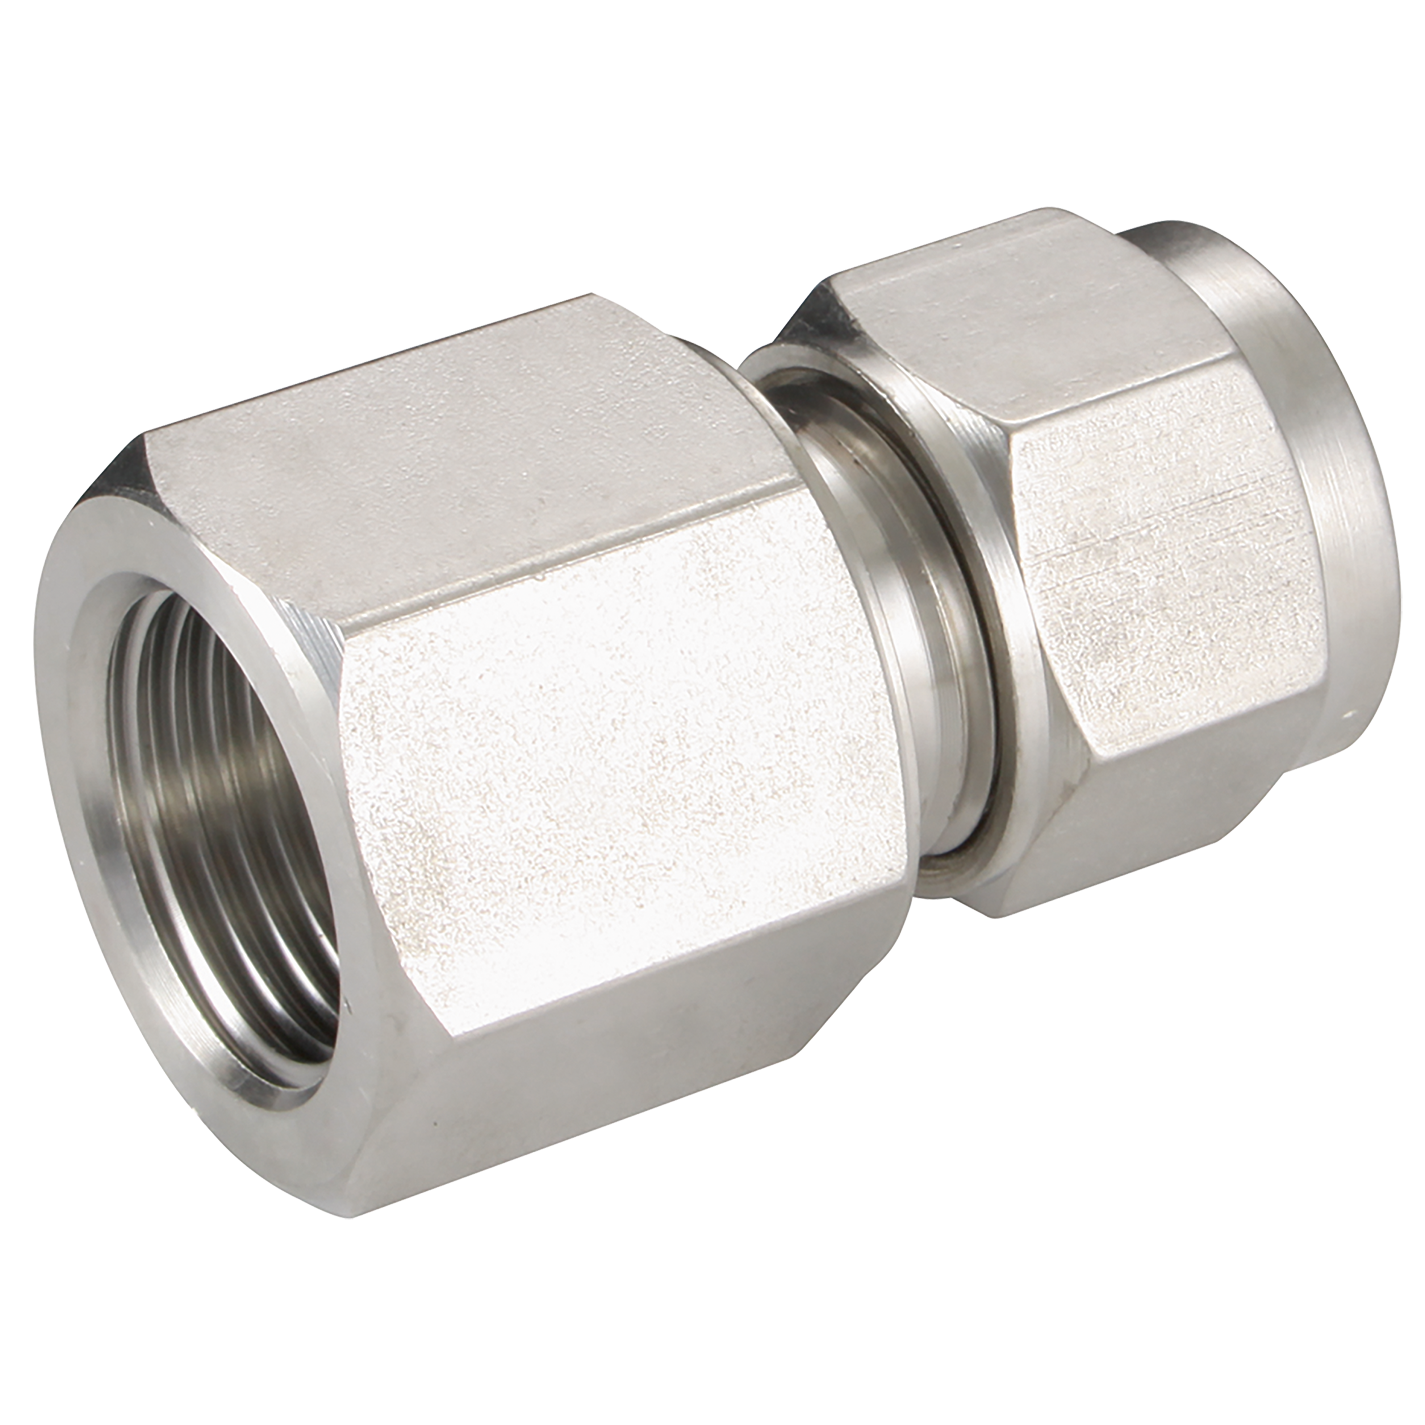 FEMALE CONNECTOR 20 OD 1/2 BSPP